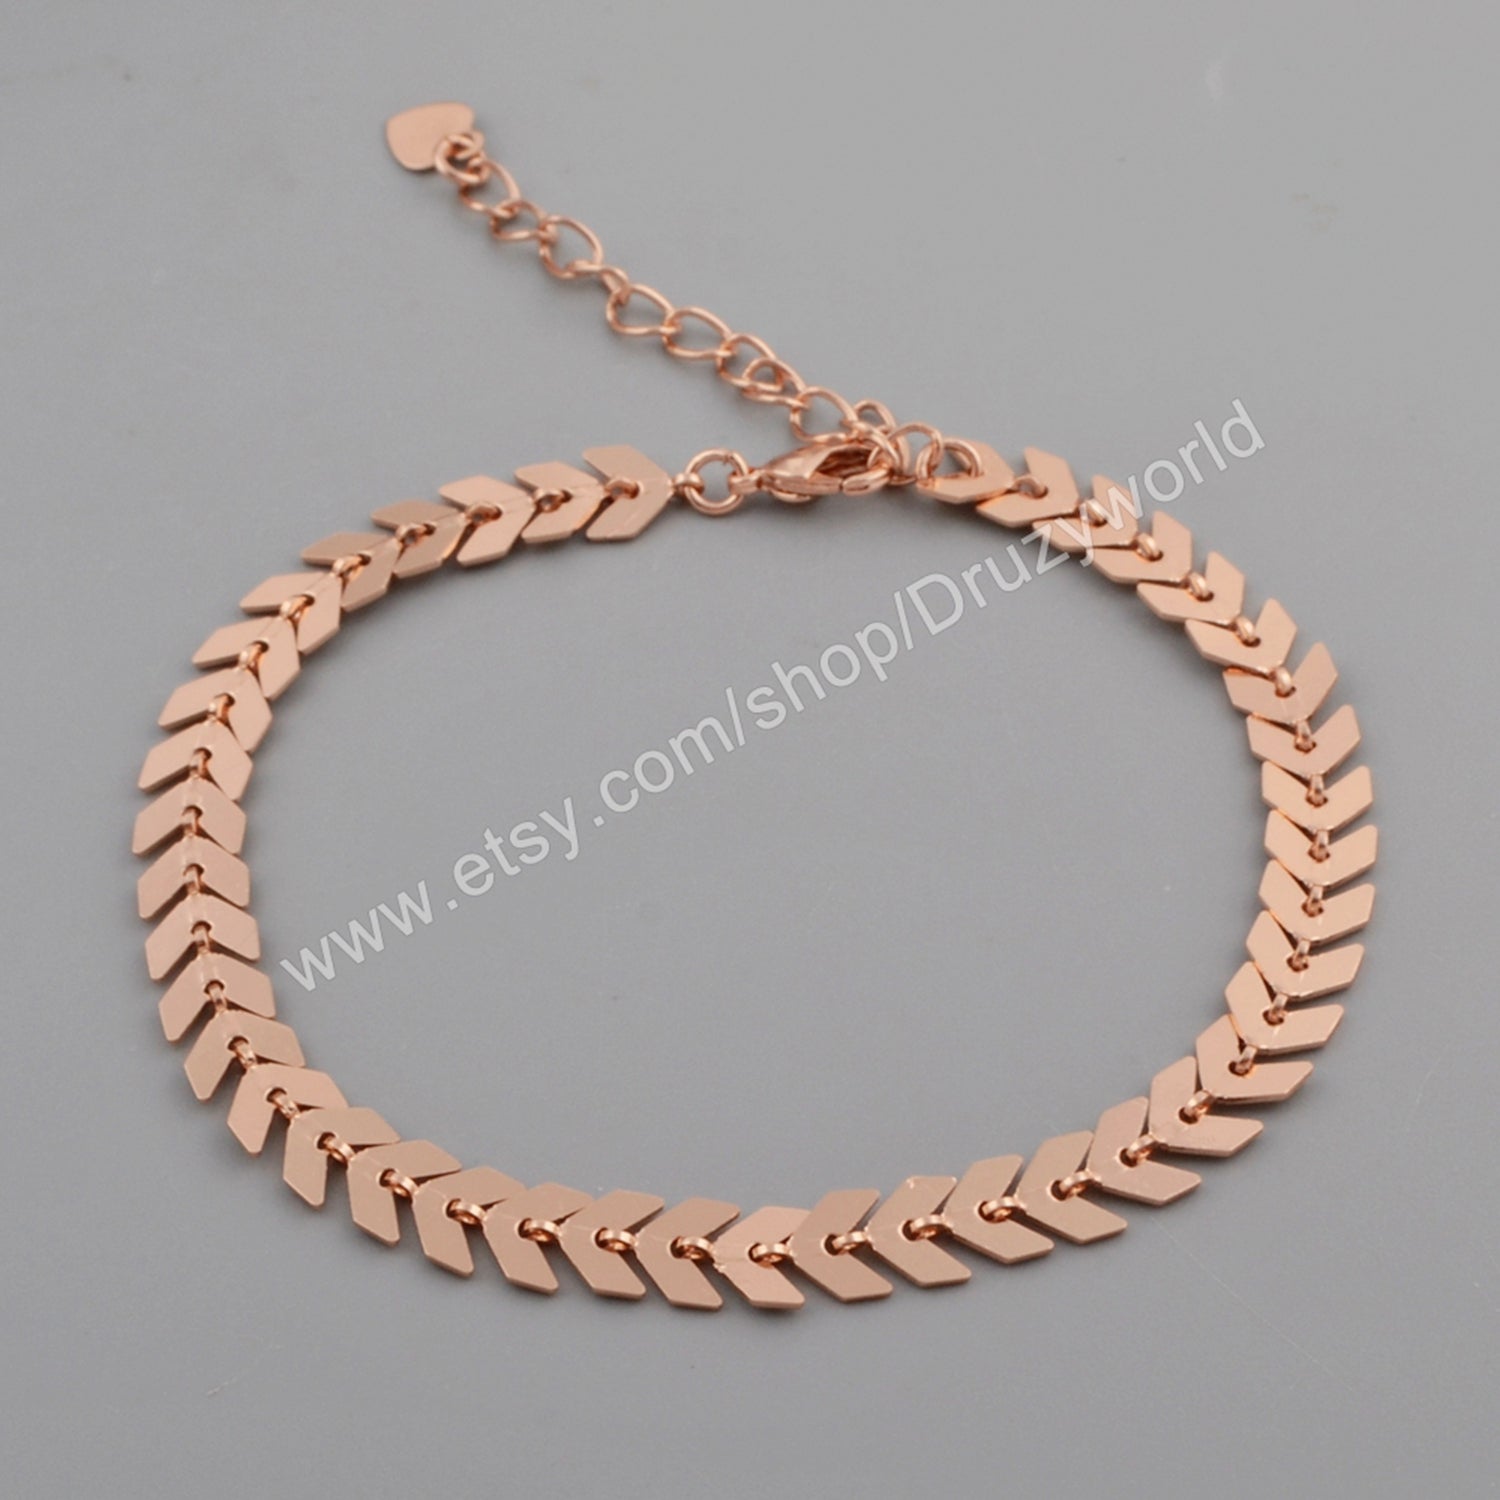 Buy Rose Gold Bracelet Bangle in Modern Design, Solid Sterling Silver Bangle  With Oval Contour and Rose Gold Accent, Handmade Minimalist Jewelry Online  in India - Etsy